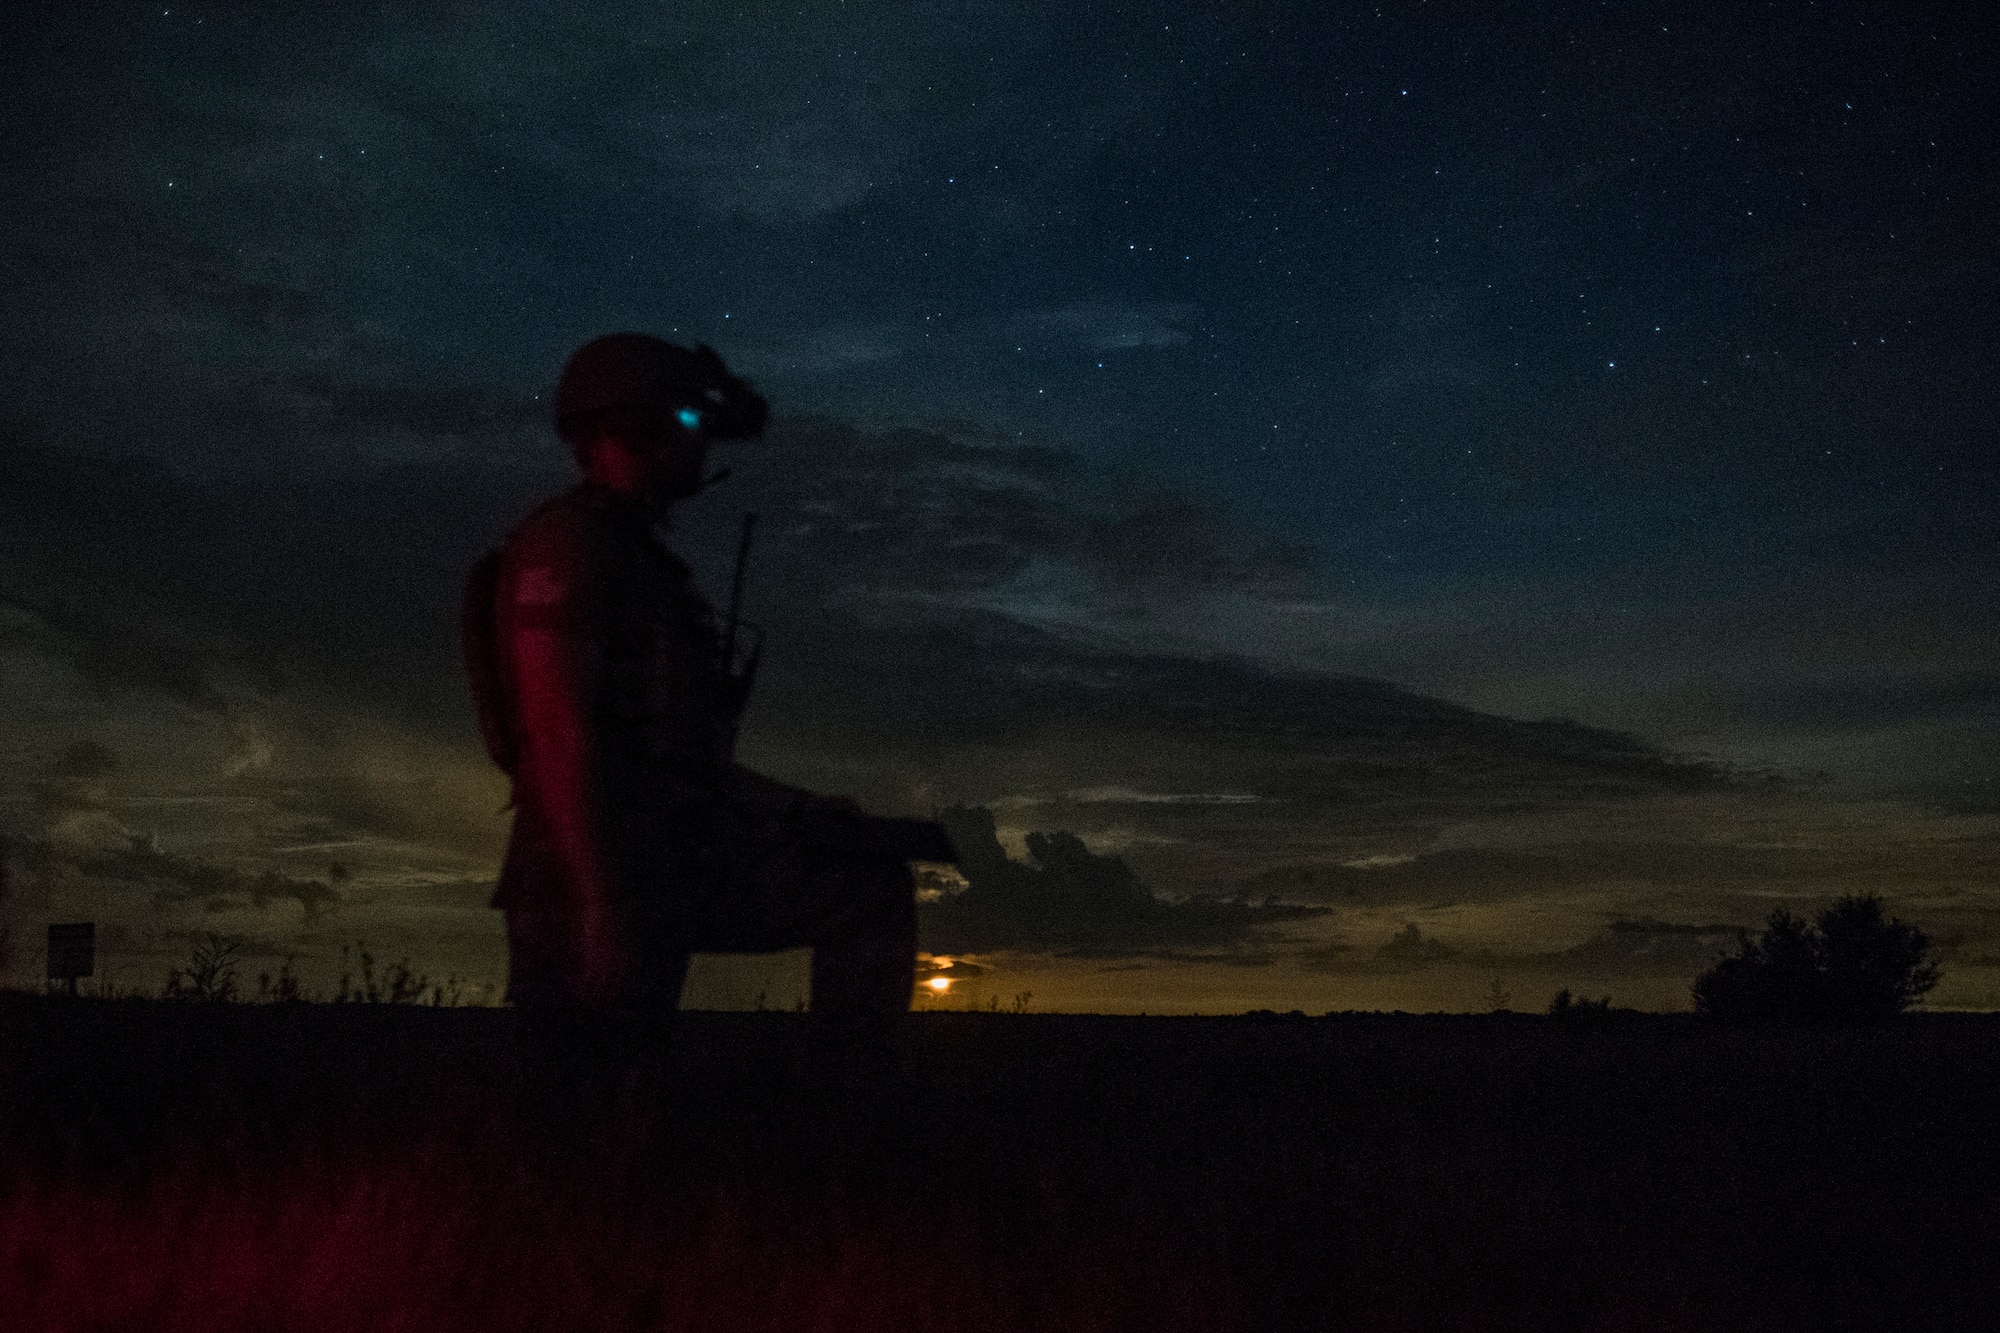 A single special operations troop kneels on one knee in front of a rapidly fading sunset. The troop is using night vision equipment as the light fades.